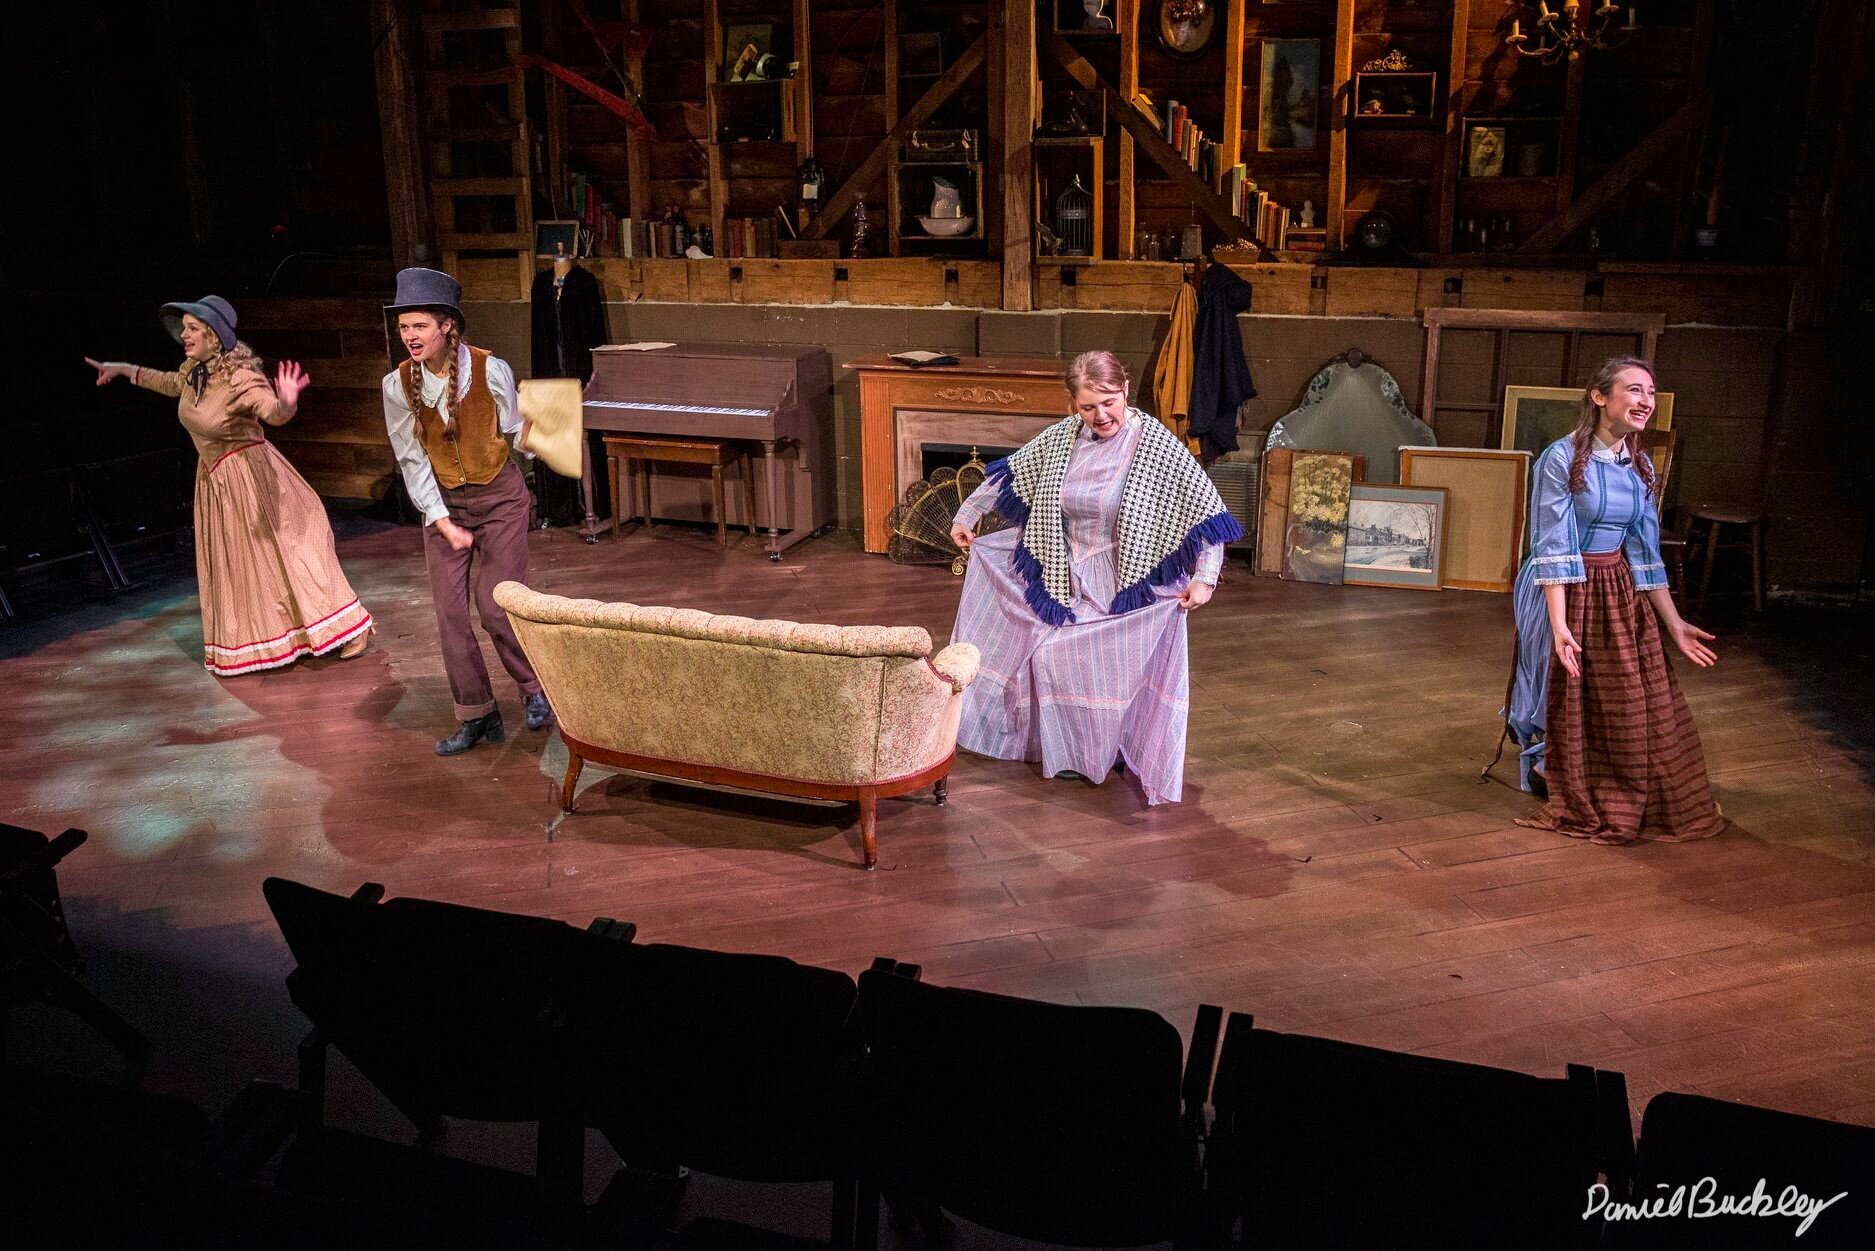    Little Women The Musical  by Knee, Howland, and Dickstein Holmdel Theatre Company   Musical direction by Randy Hurst Scenic design by Joyce Horan Lighting and sound design by Chris Szczerbienski  Costume design by Kathy Connolly and Jessica Freela